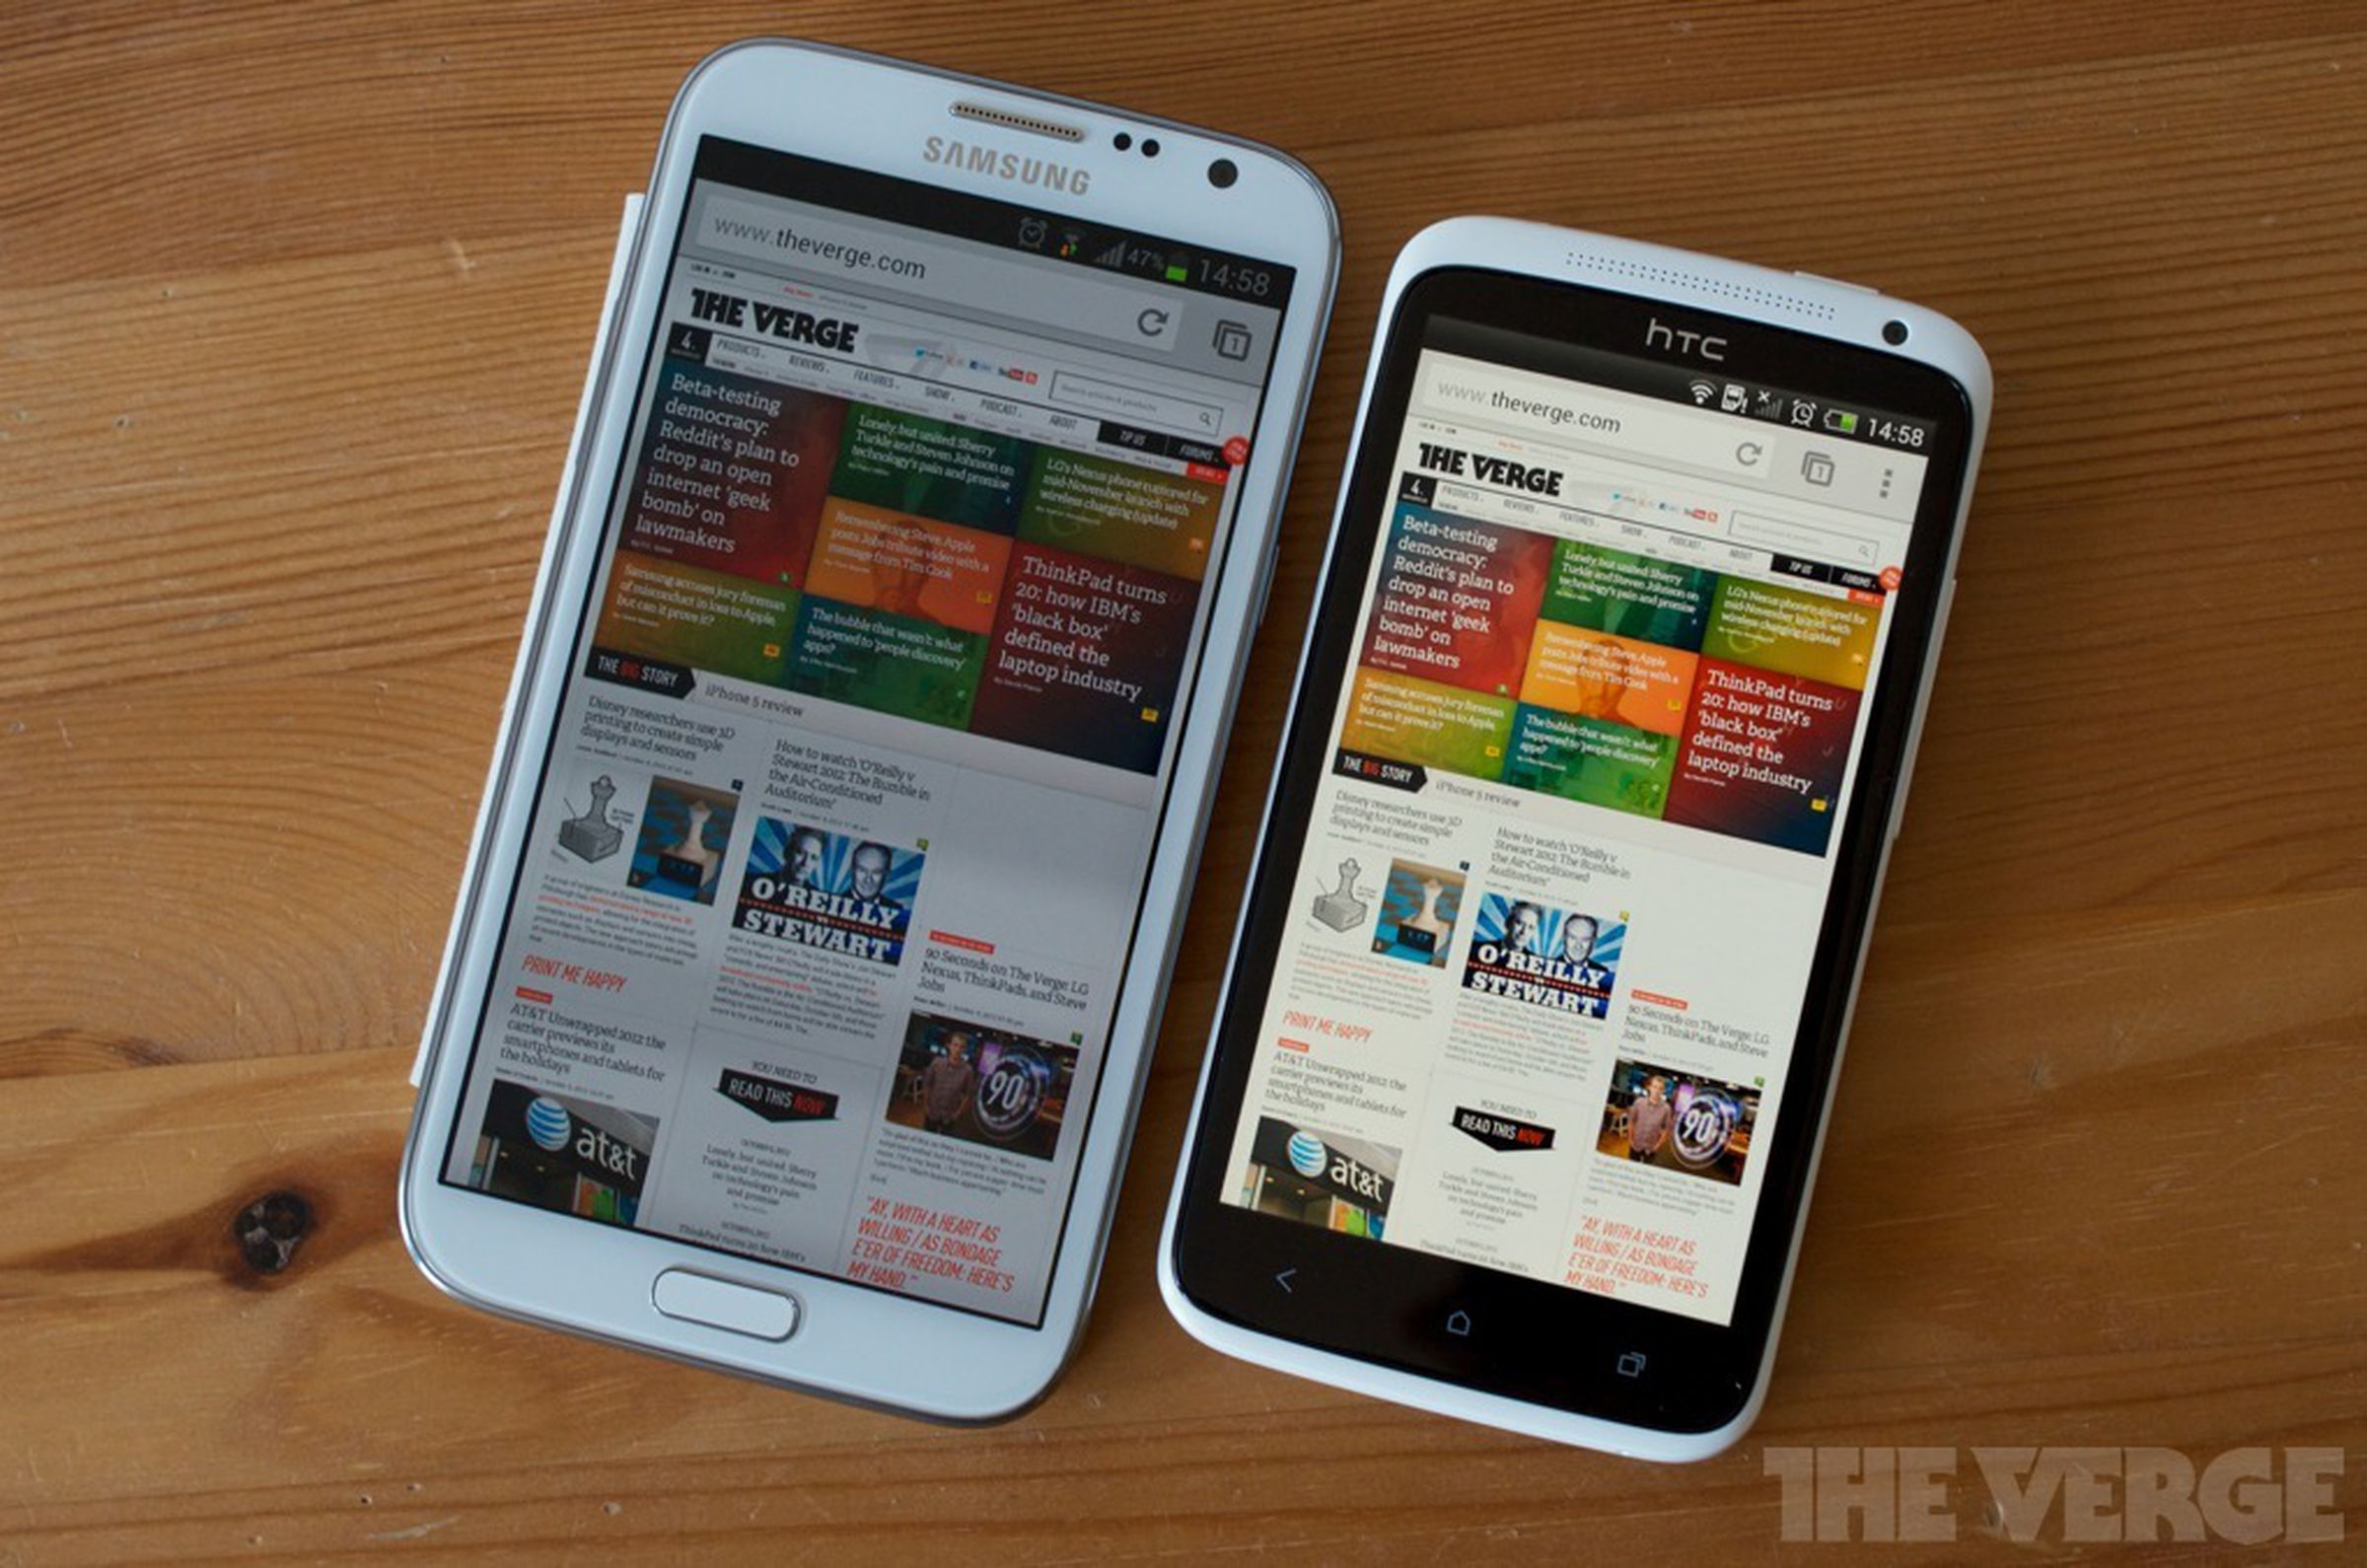 Samsung Galaxy Note II review photos